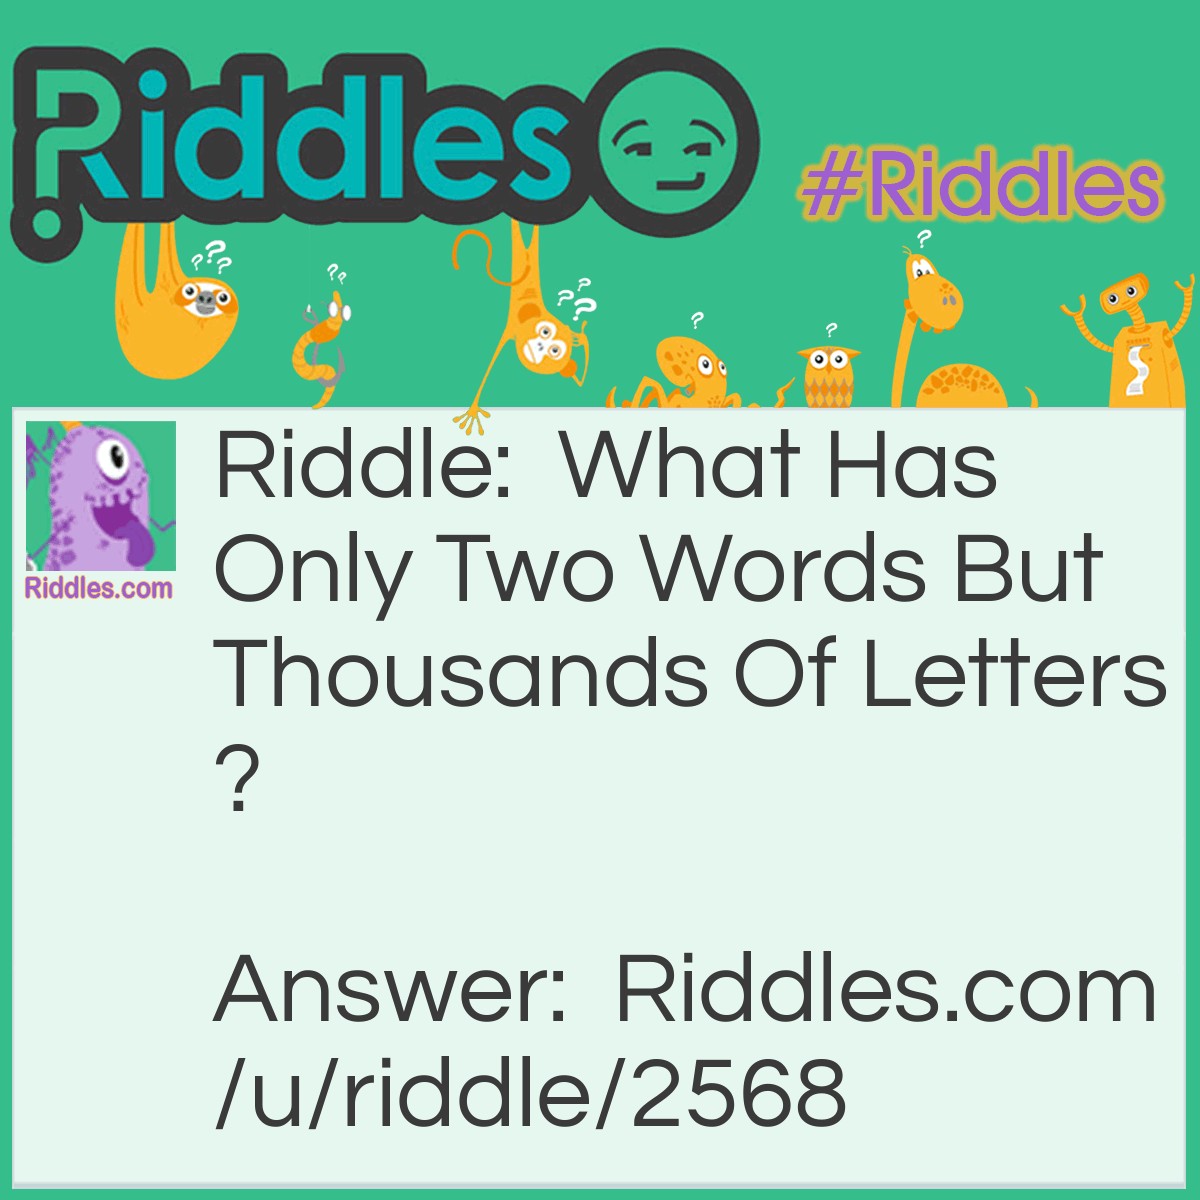 Riddle: What Has Only Two Words But Thousands Of Letters? Answer: Post Office.